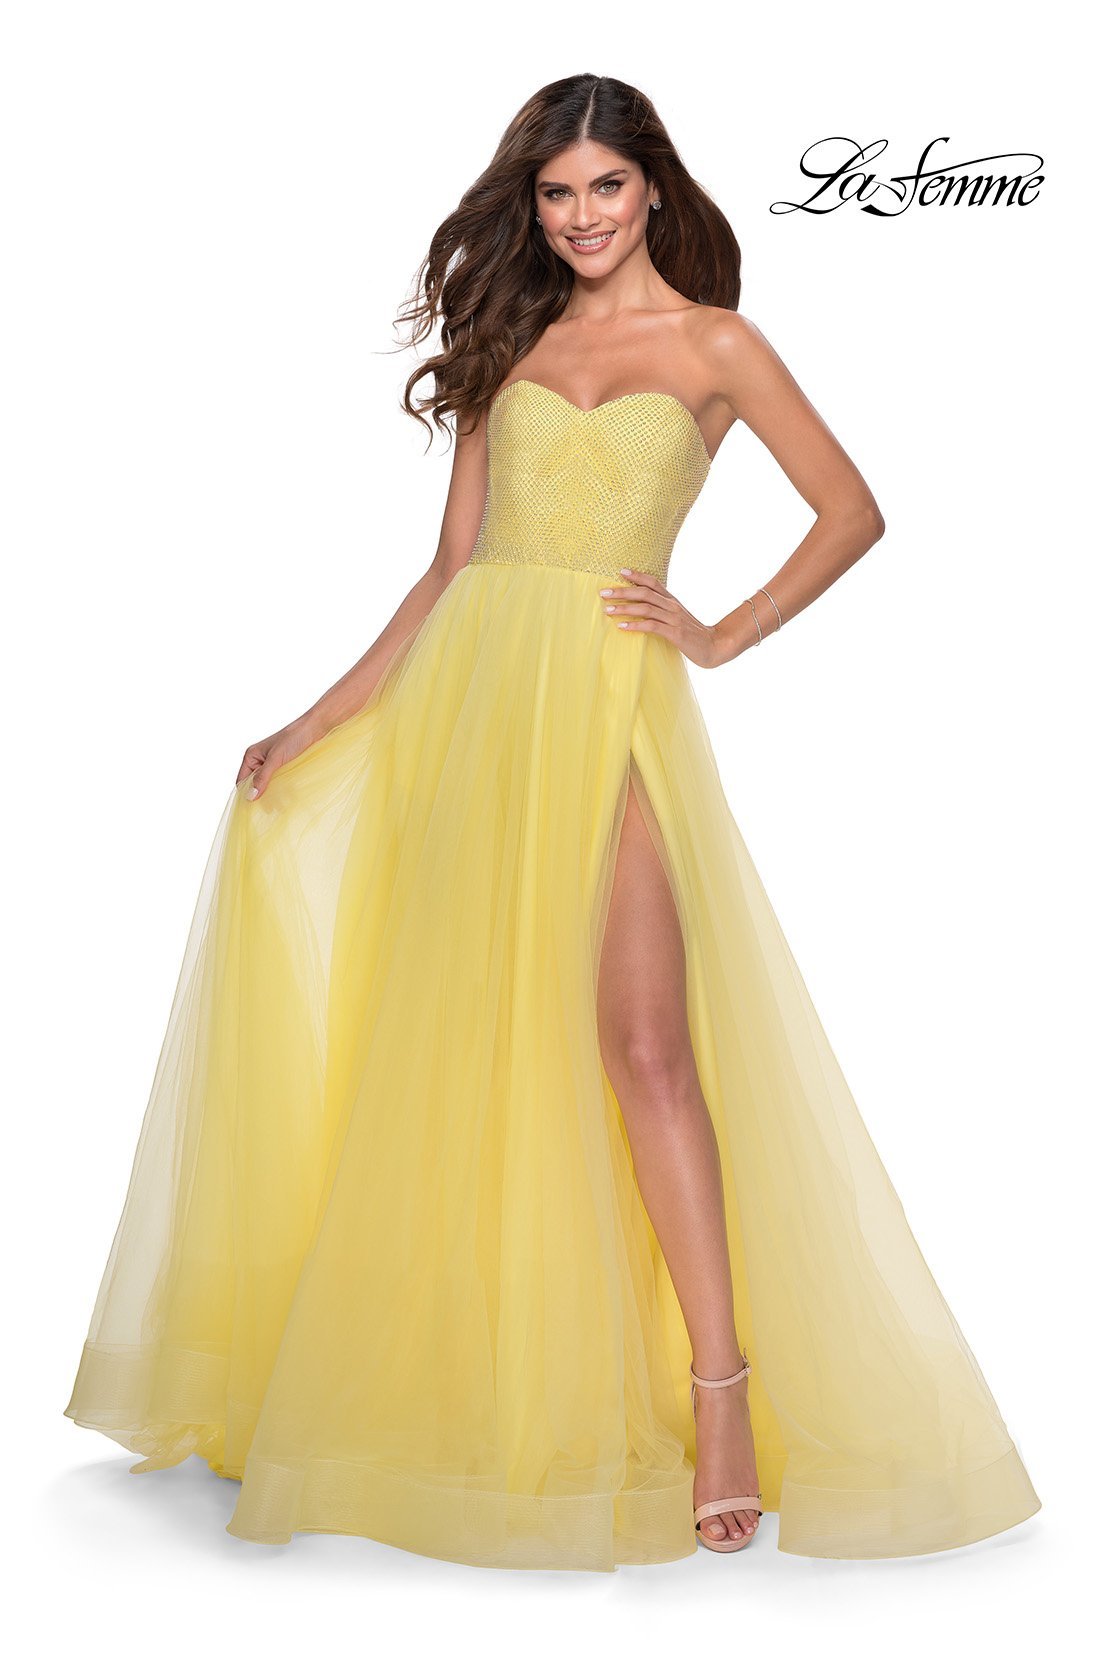 La Femme 28559 dress images in these colors: Light Blue, Lilac Mist, Peach, Yellow.